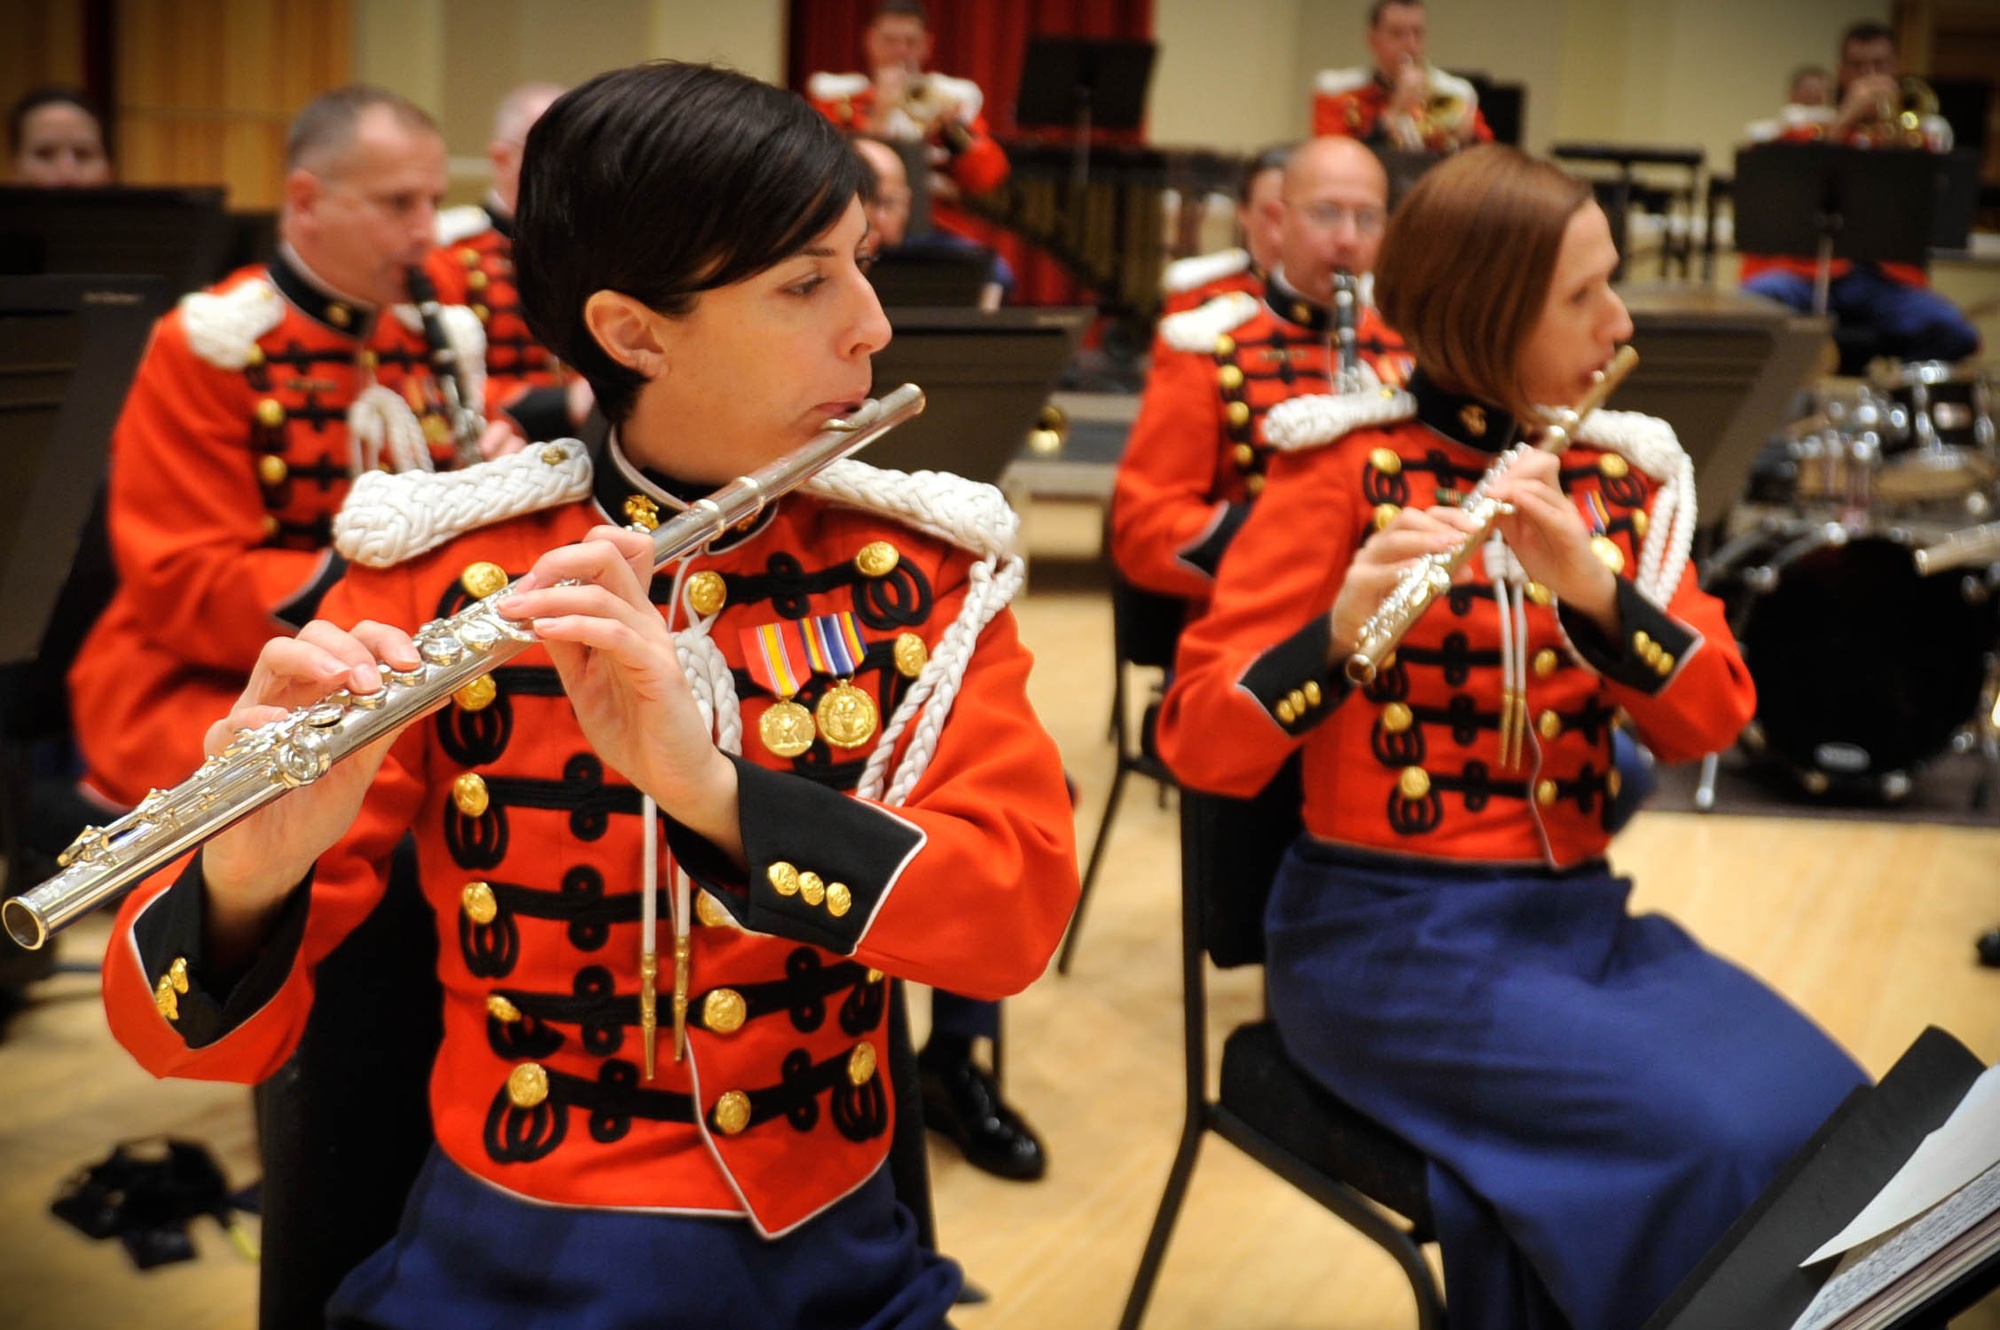 Images - 'The President's Own' United States Marine Band in concert [Image  7 of 9] - DVIDS